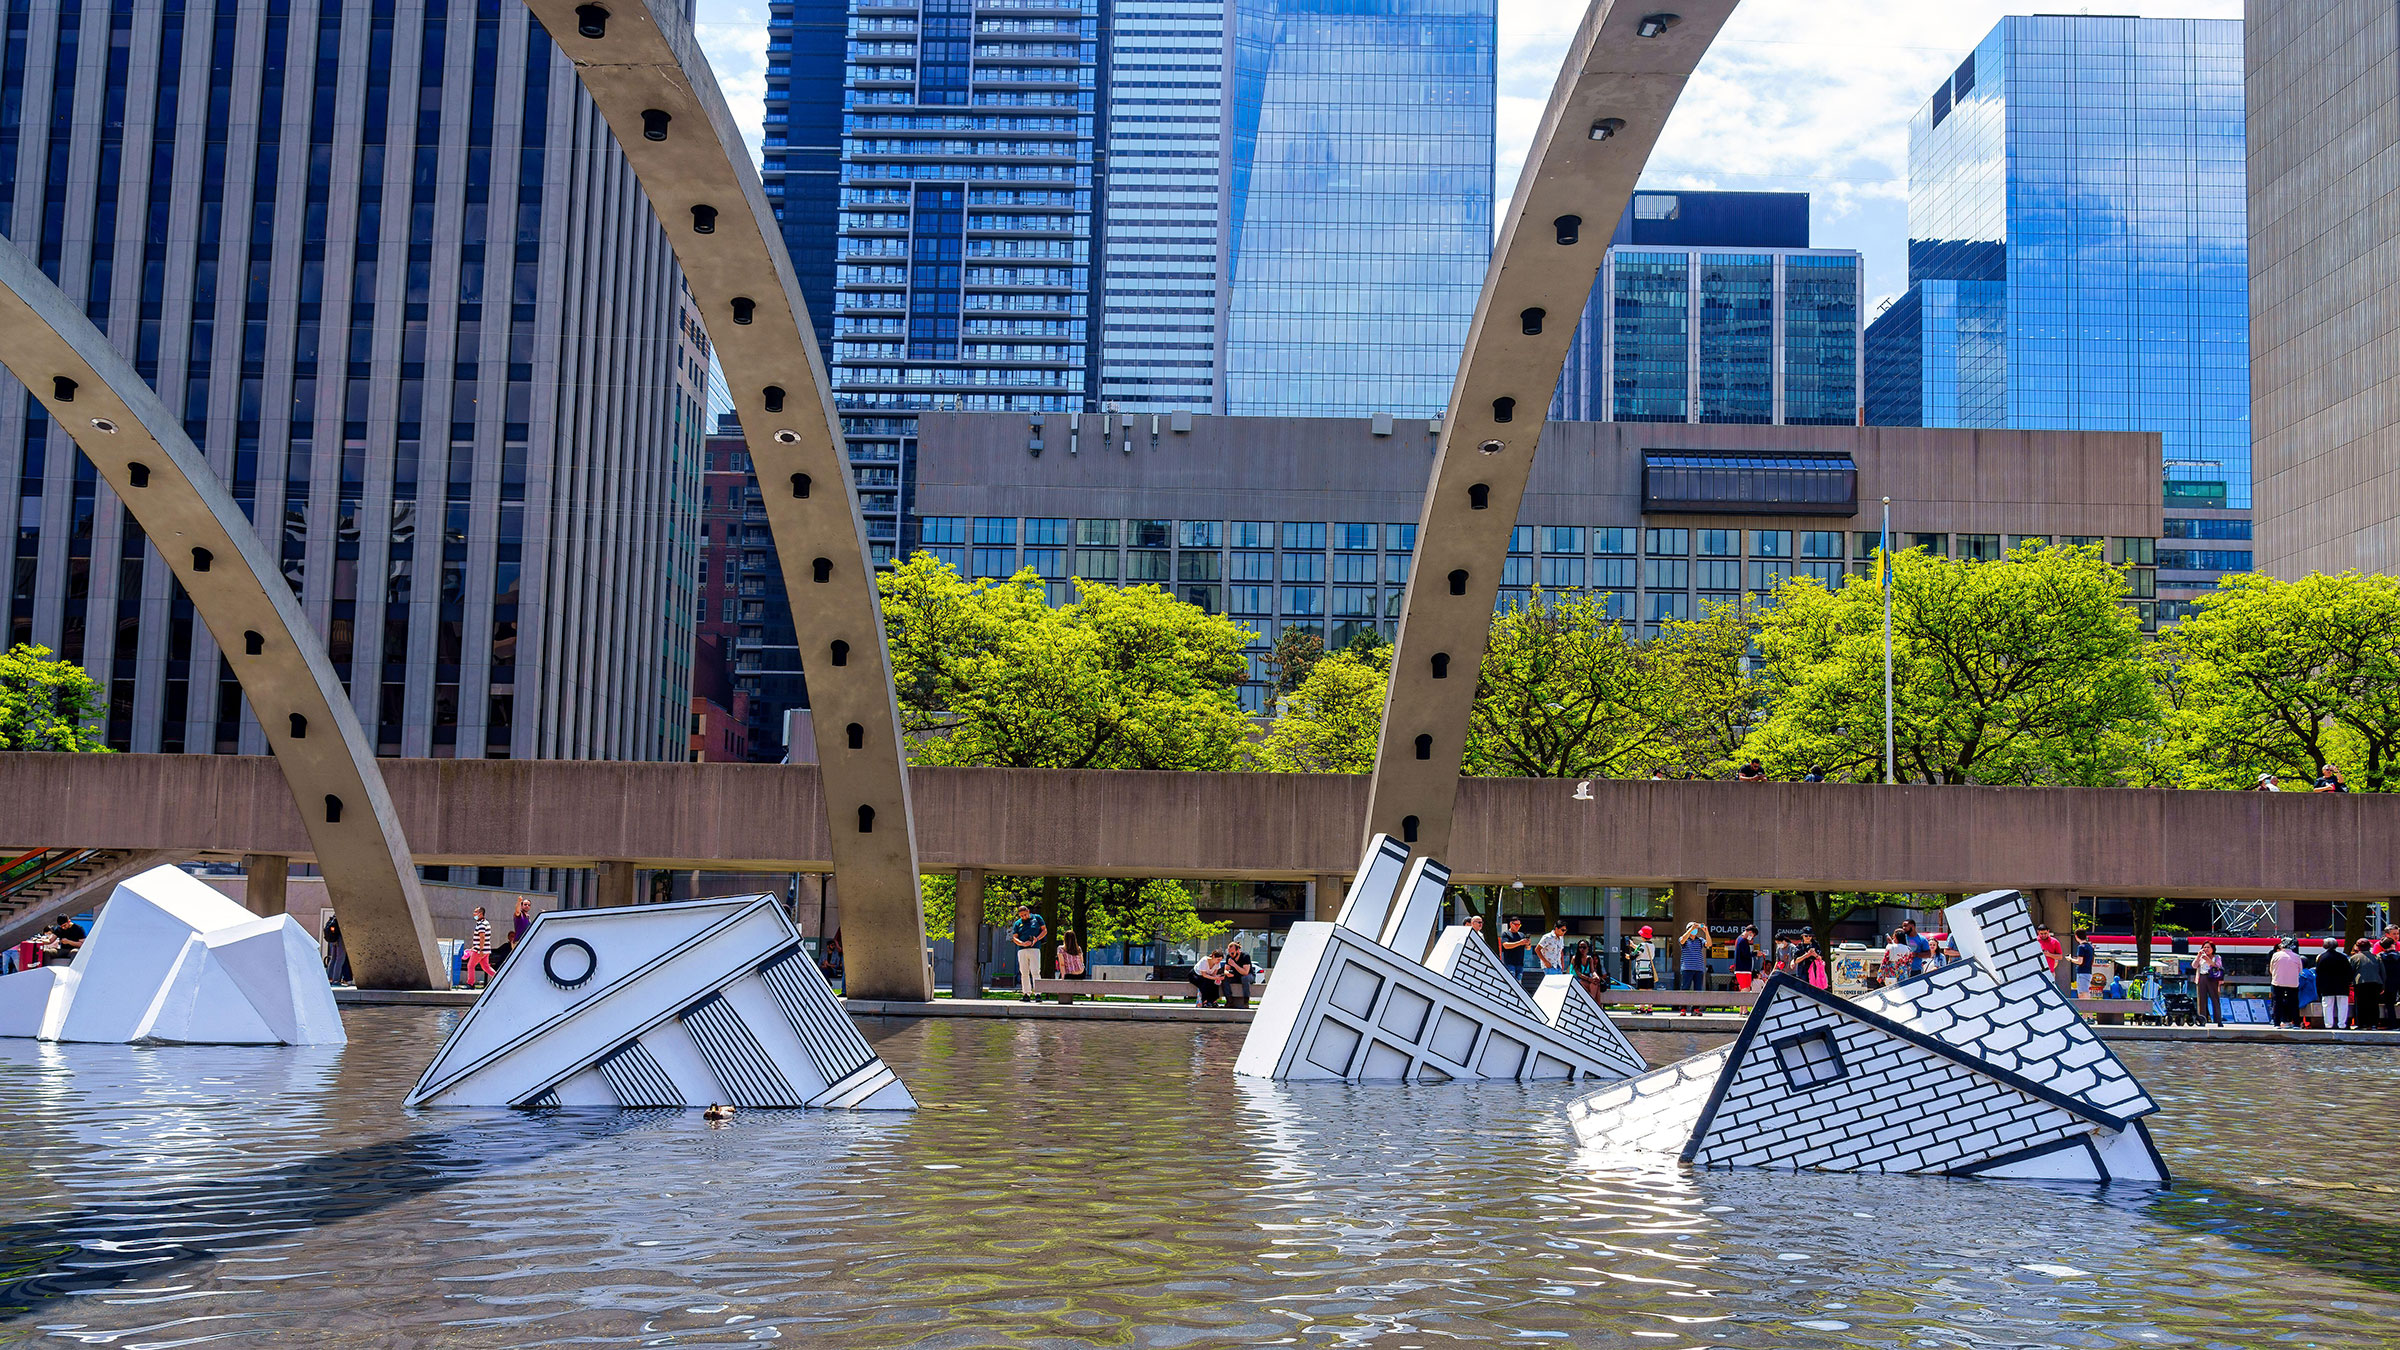 "Over Floe," a sculpture by local artist John Notten, at ArtworkxTO in Nathan Phillips Square in Toronto. (Torontonian/Alamy)